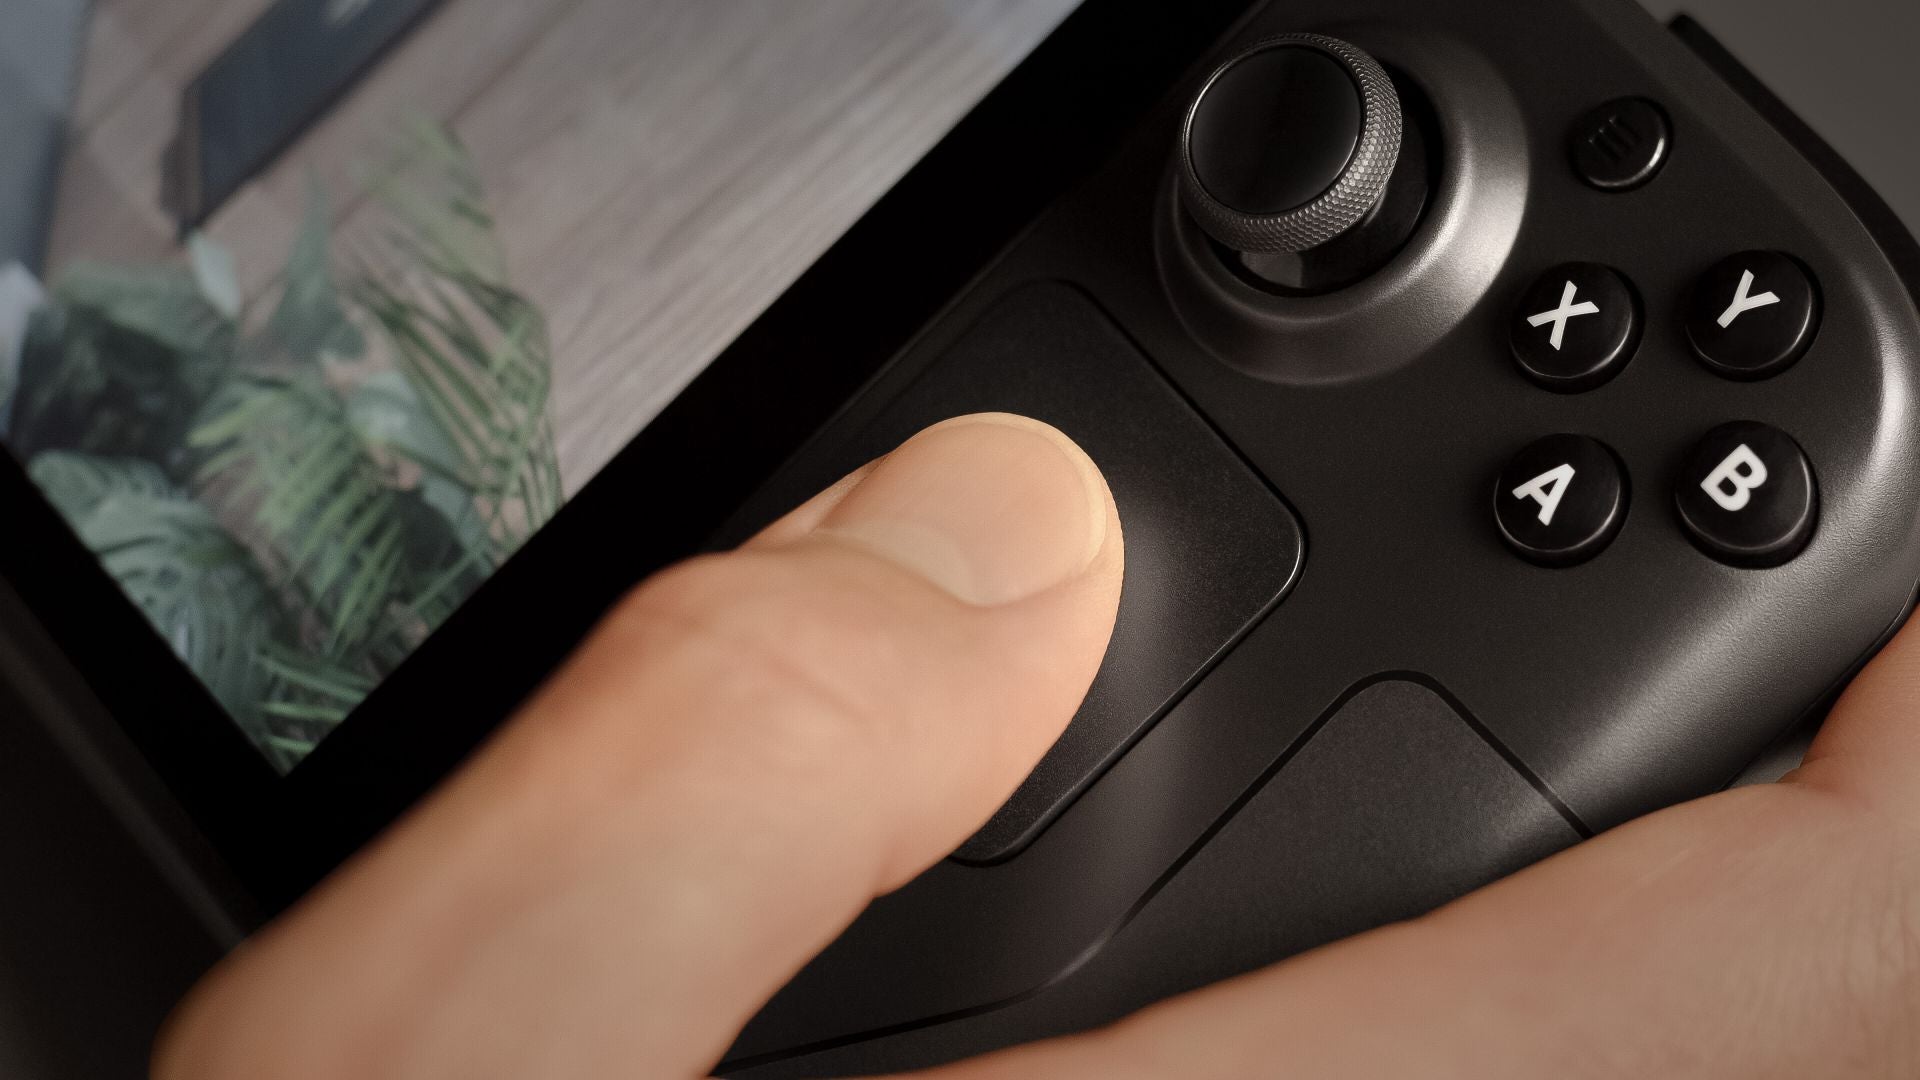 Image for Steam Deck's analogue sticks won't suffer from the Switch's infamous drift, Valve says